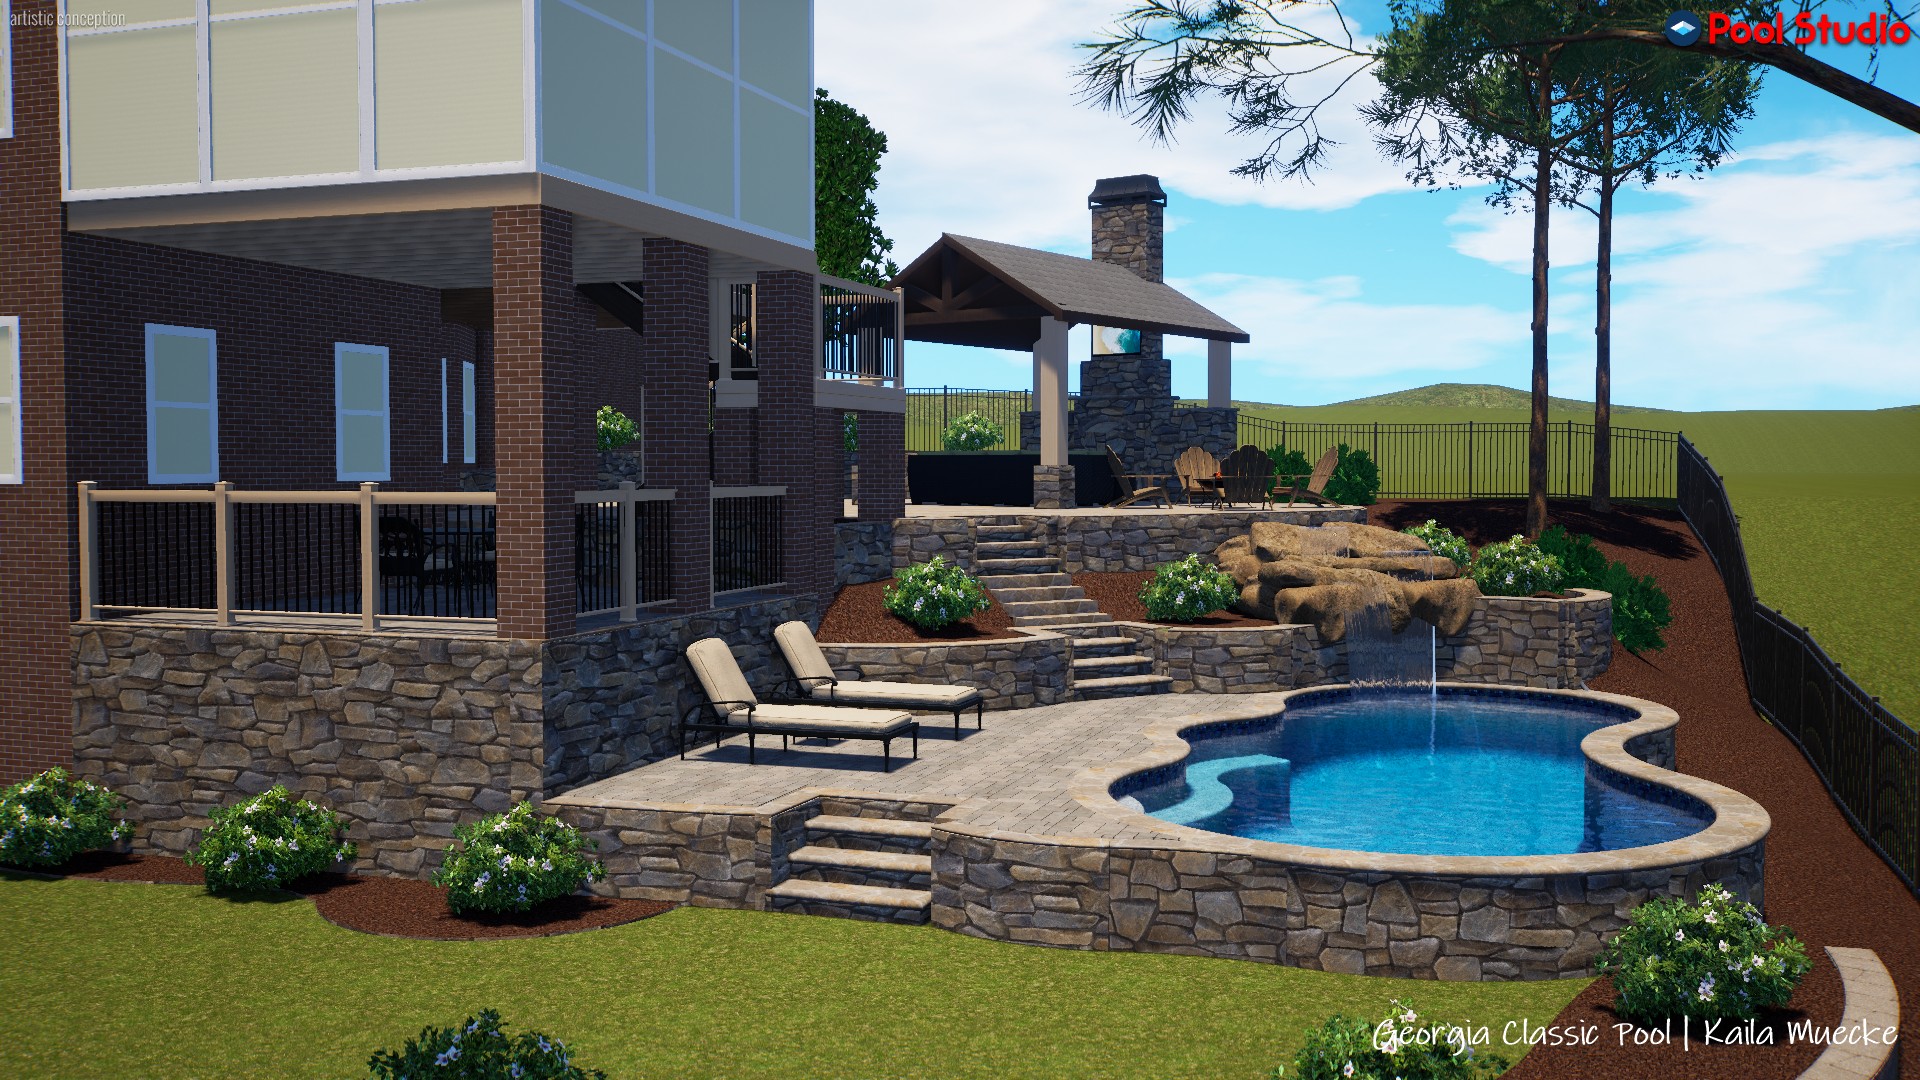 A picturesque 3D swimming pool design featuring a serene waterfall, adding a touch of natural beauty to your outdoor oasis.